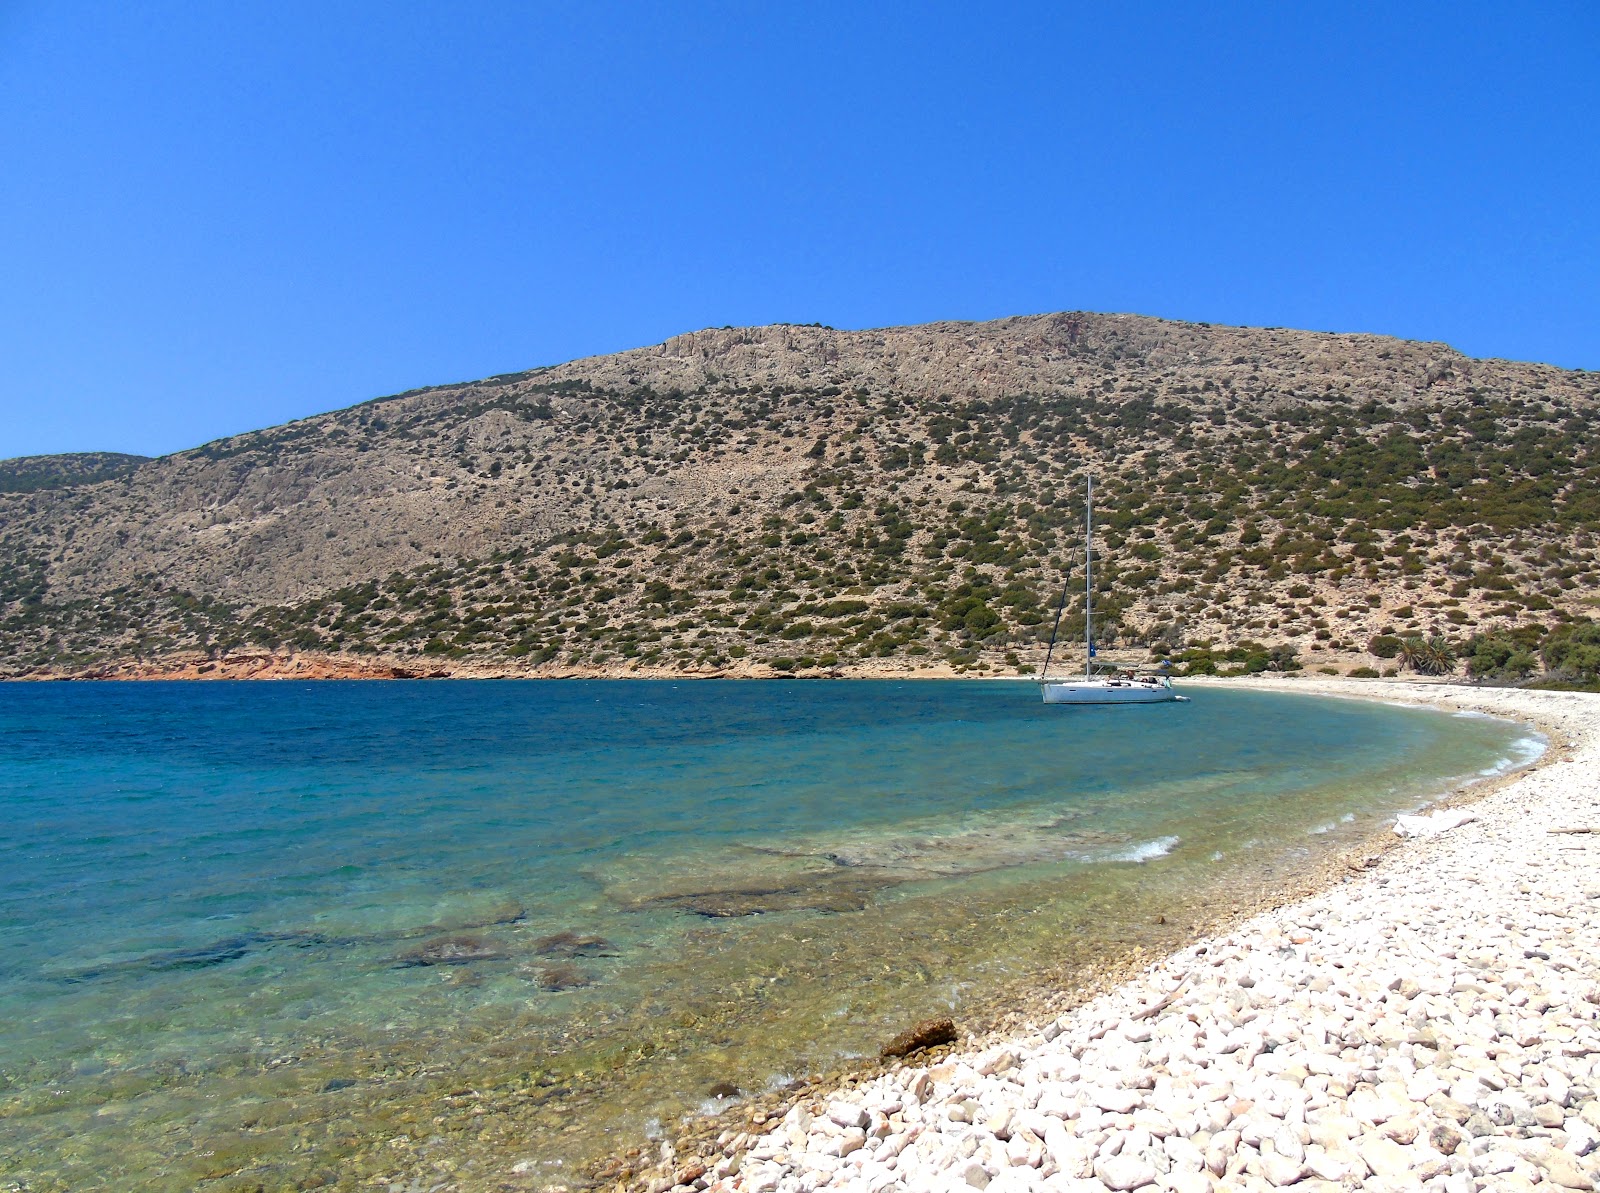 Photo of Alimia beach with rocks cover surface